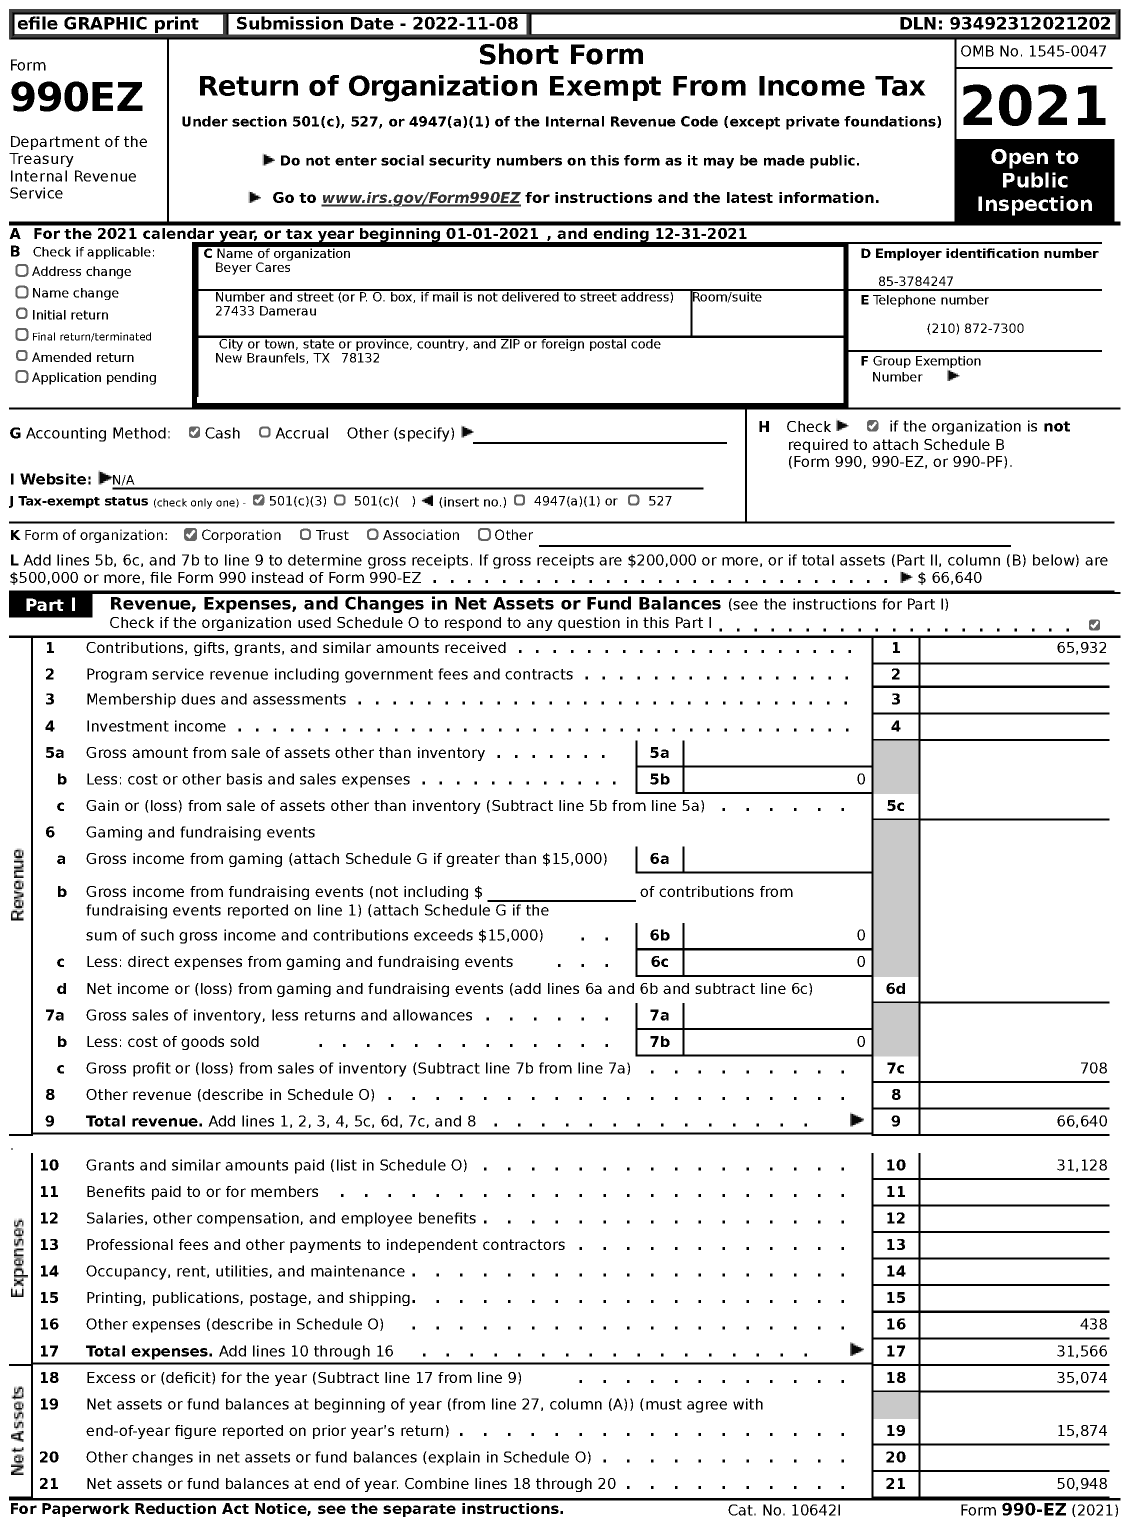 Image of first page of 2021 Form 990EZ for Beyer Cares